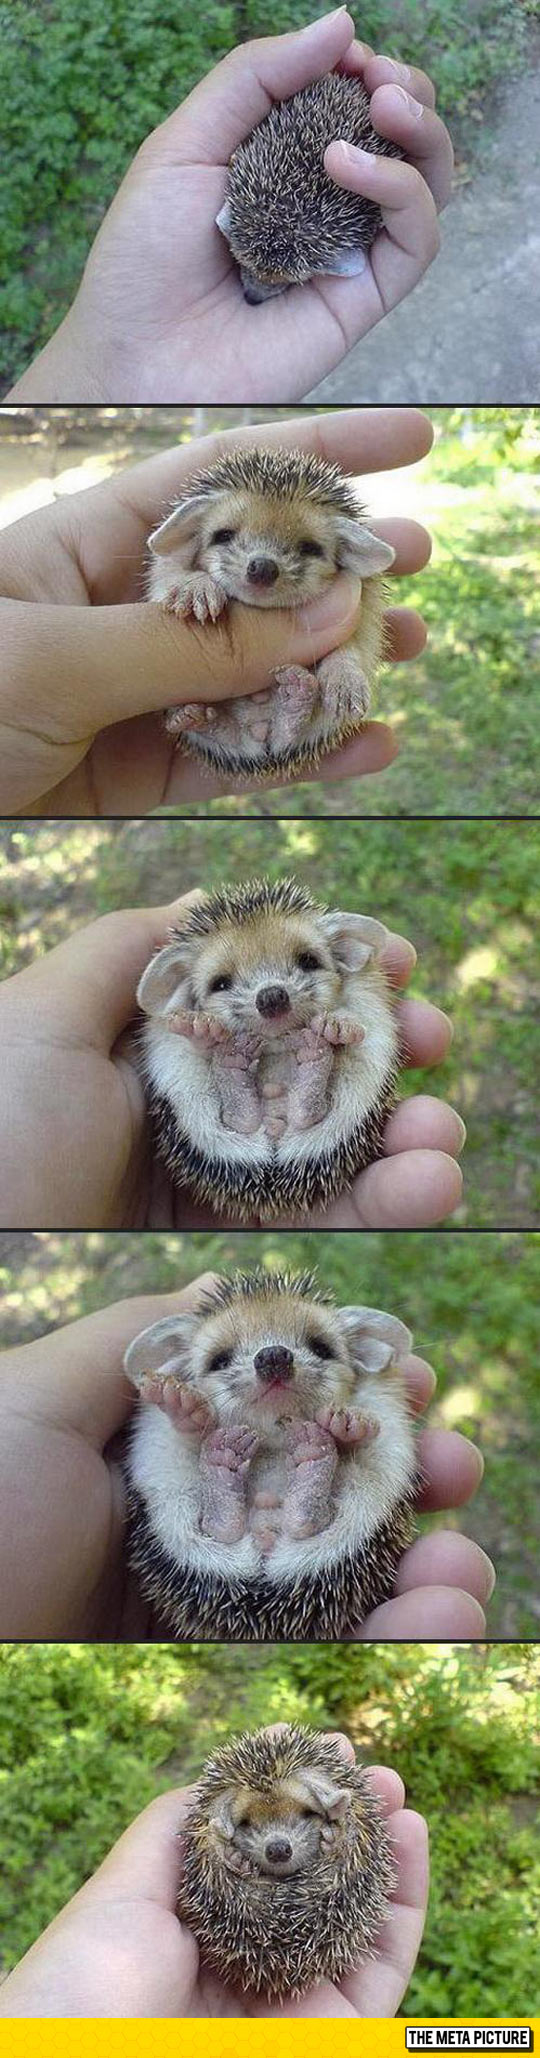 I Need This Baby Hedgehog In My Life